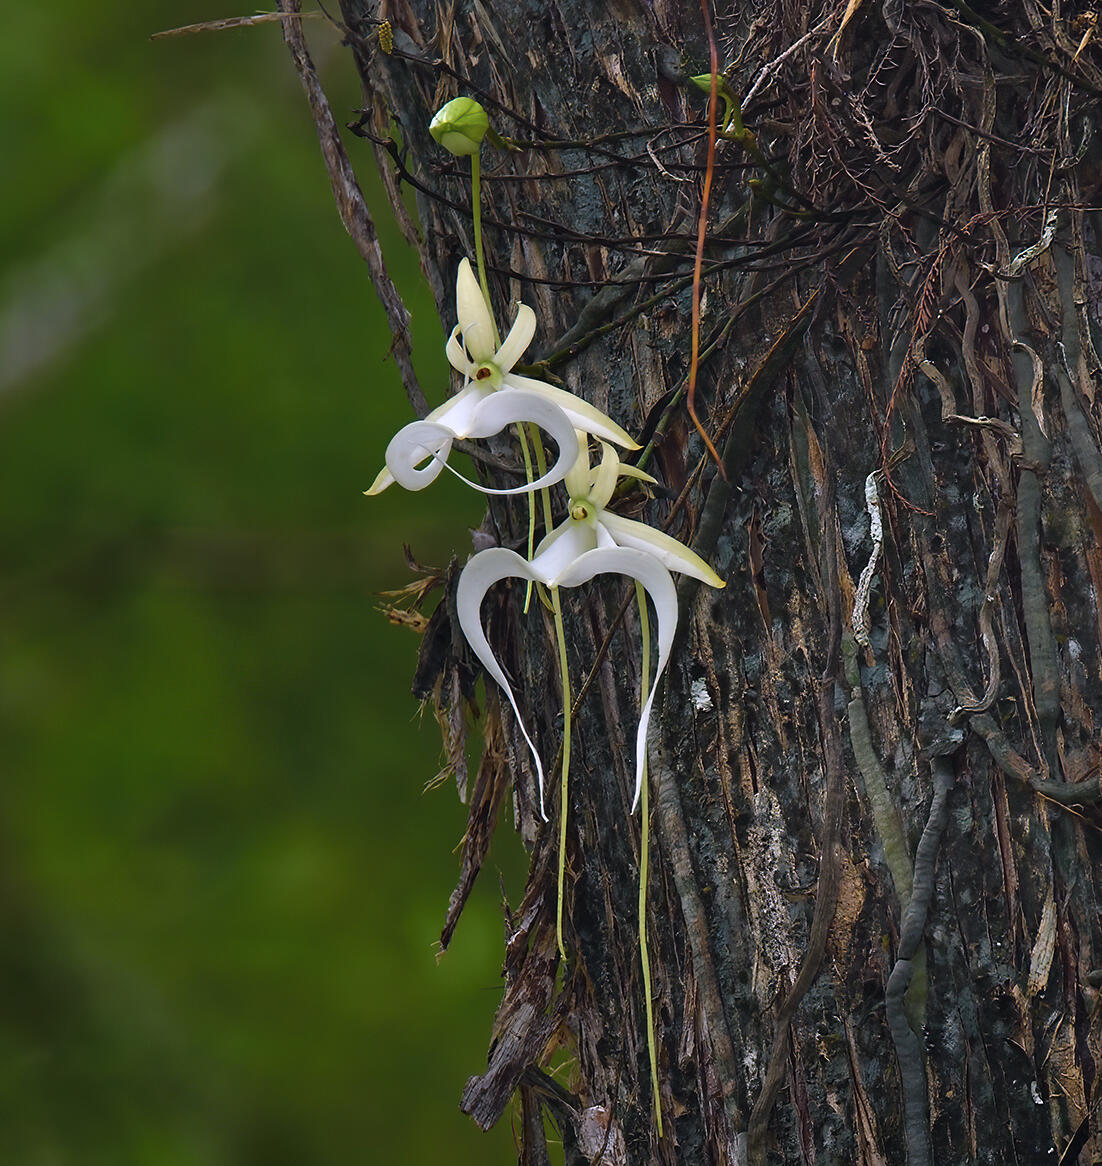 "Super" ghost orchid